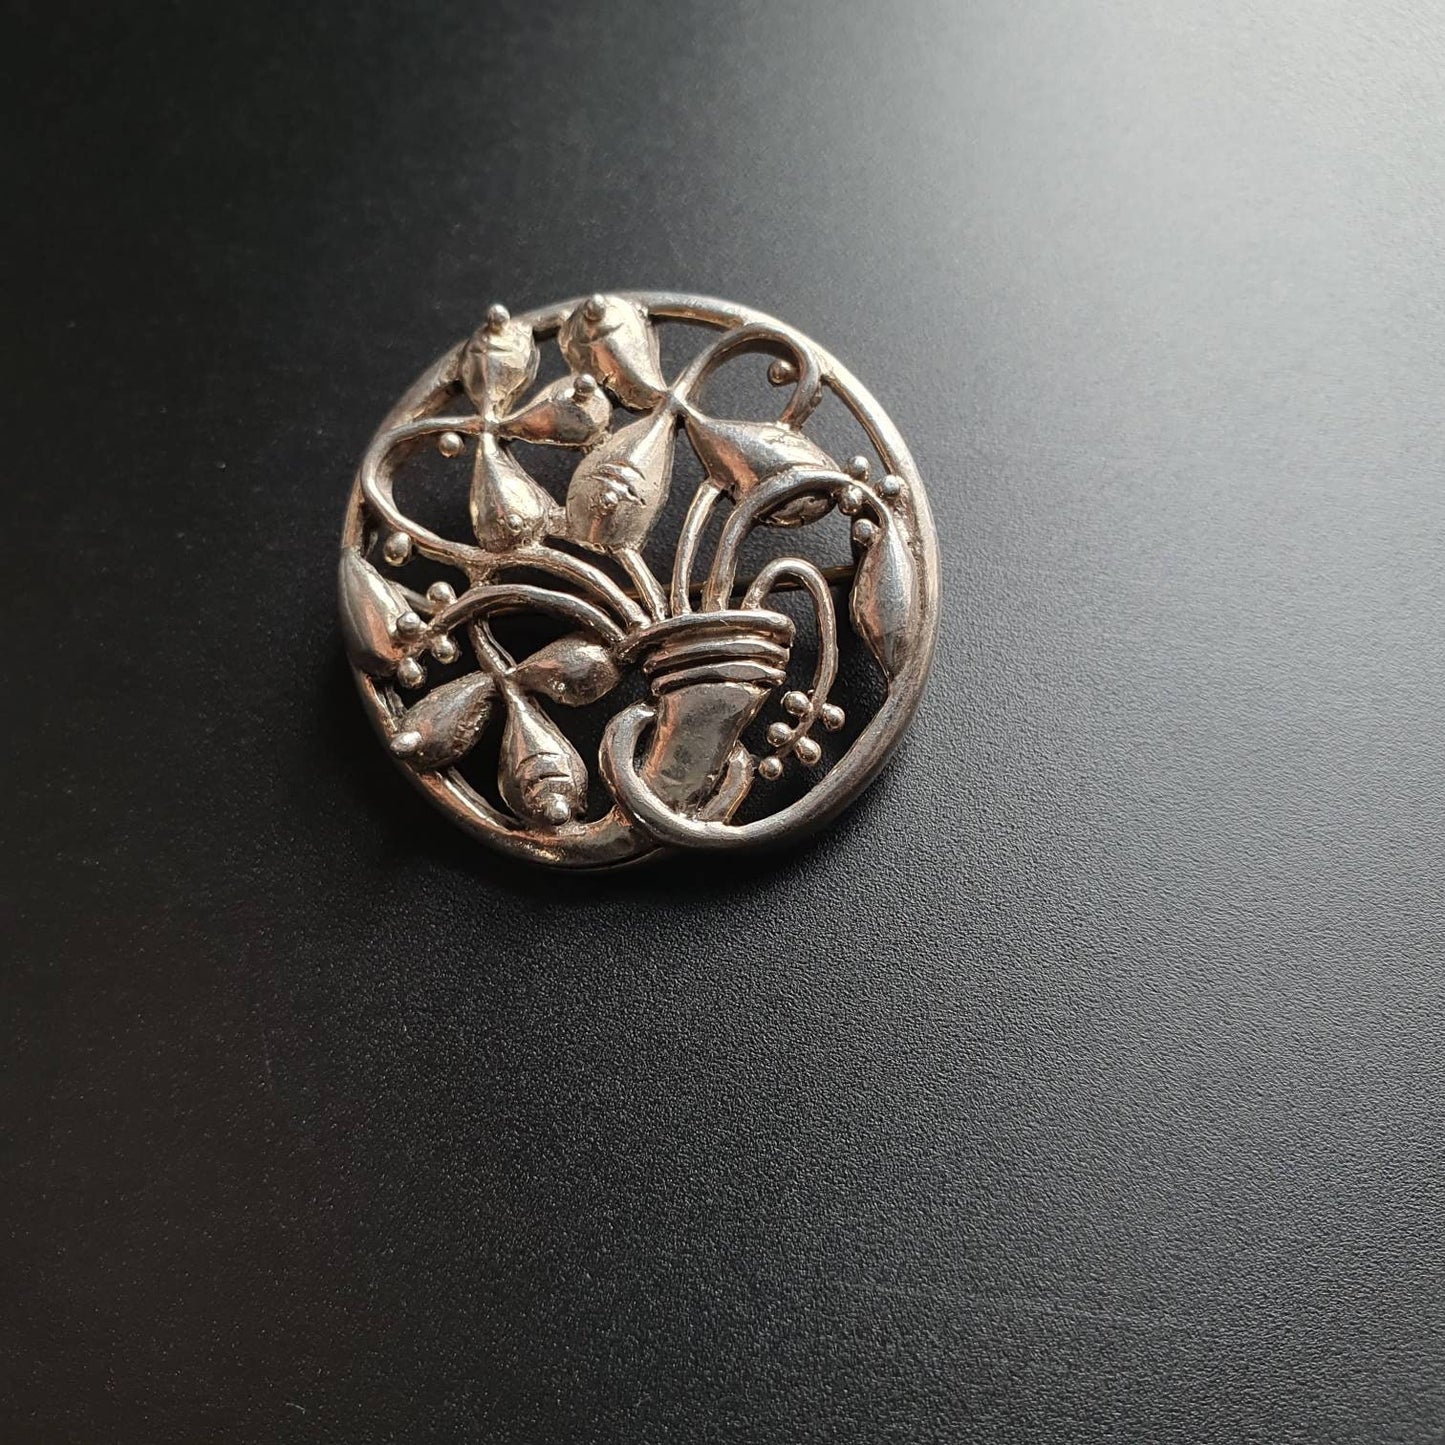 sterling silver, brooches, vintage, handmade, jewelry, gifts, dress, brooch, floral, filigree,joblot, bundle, antique, clothes jewelry